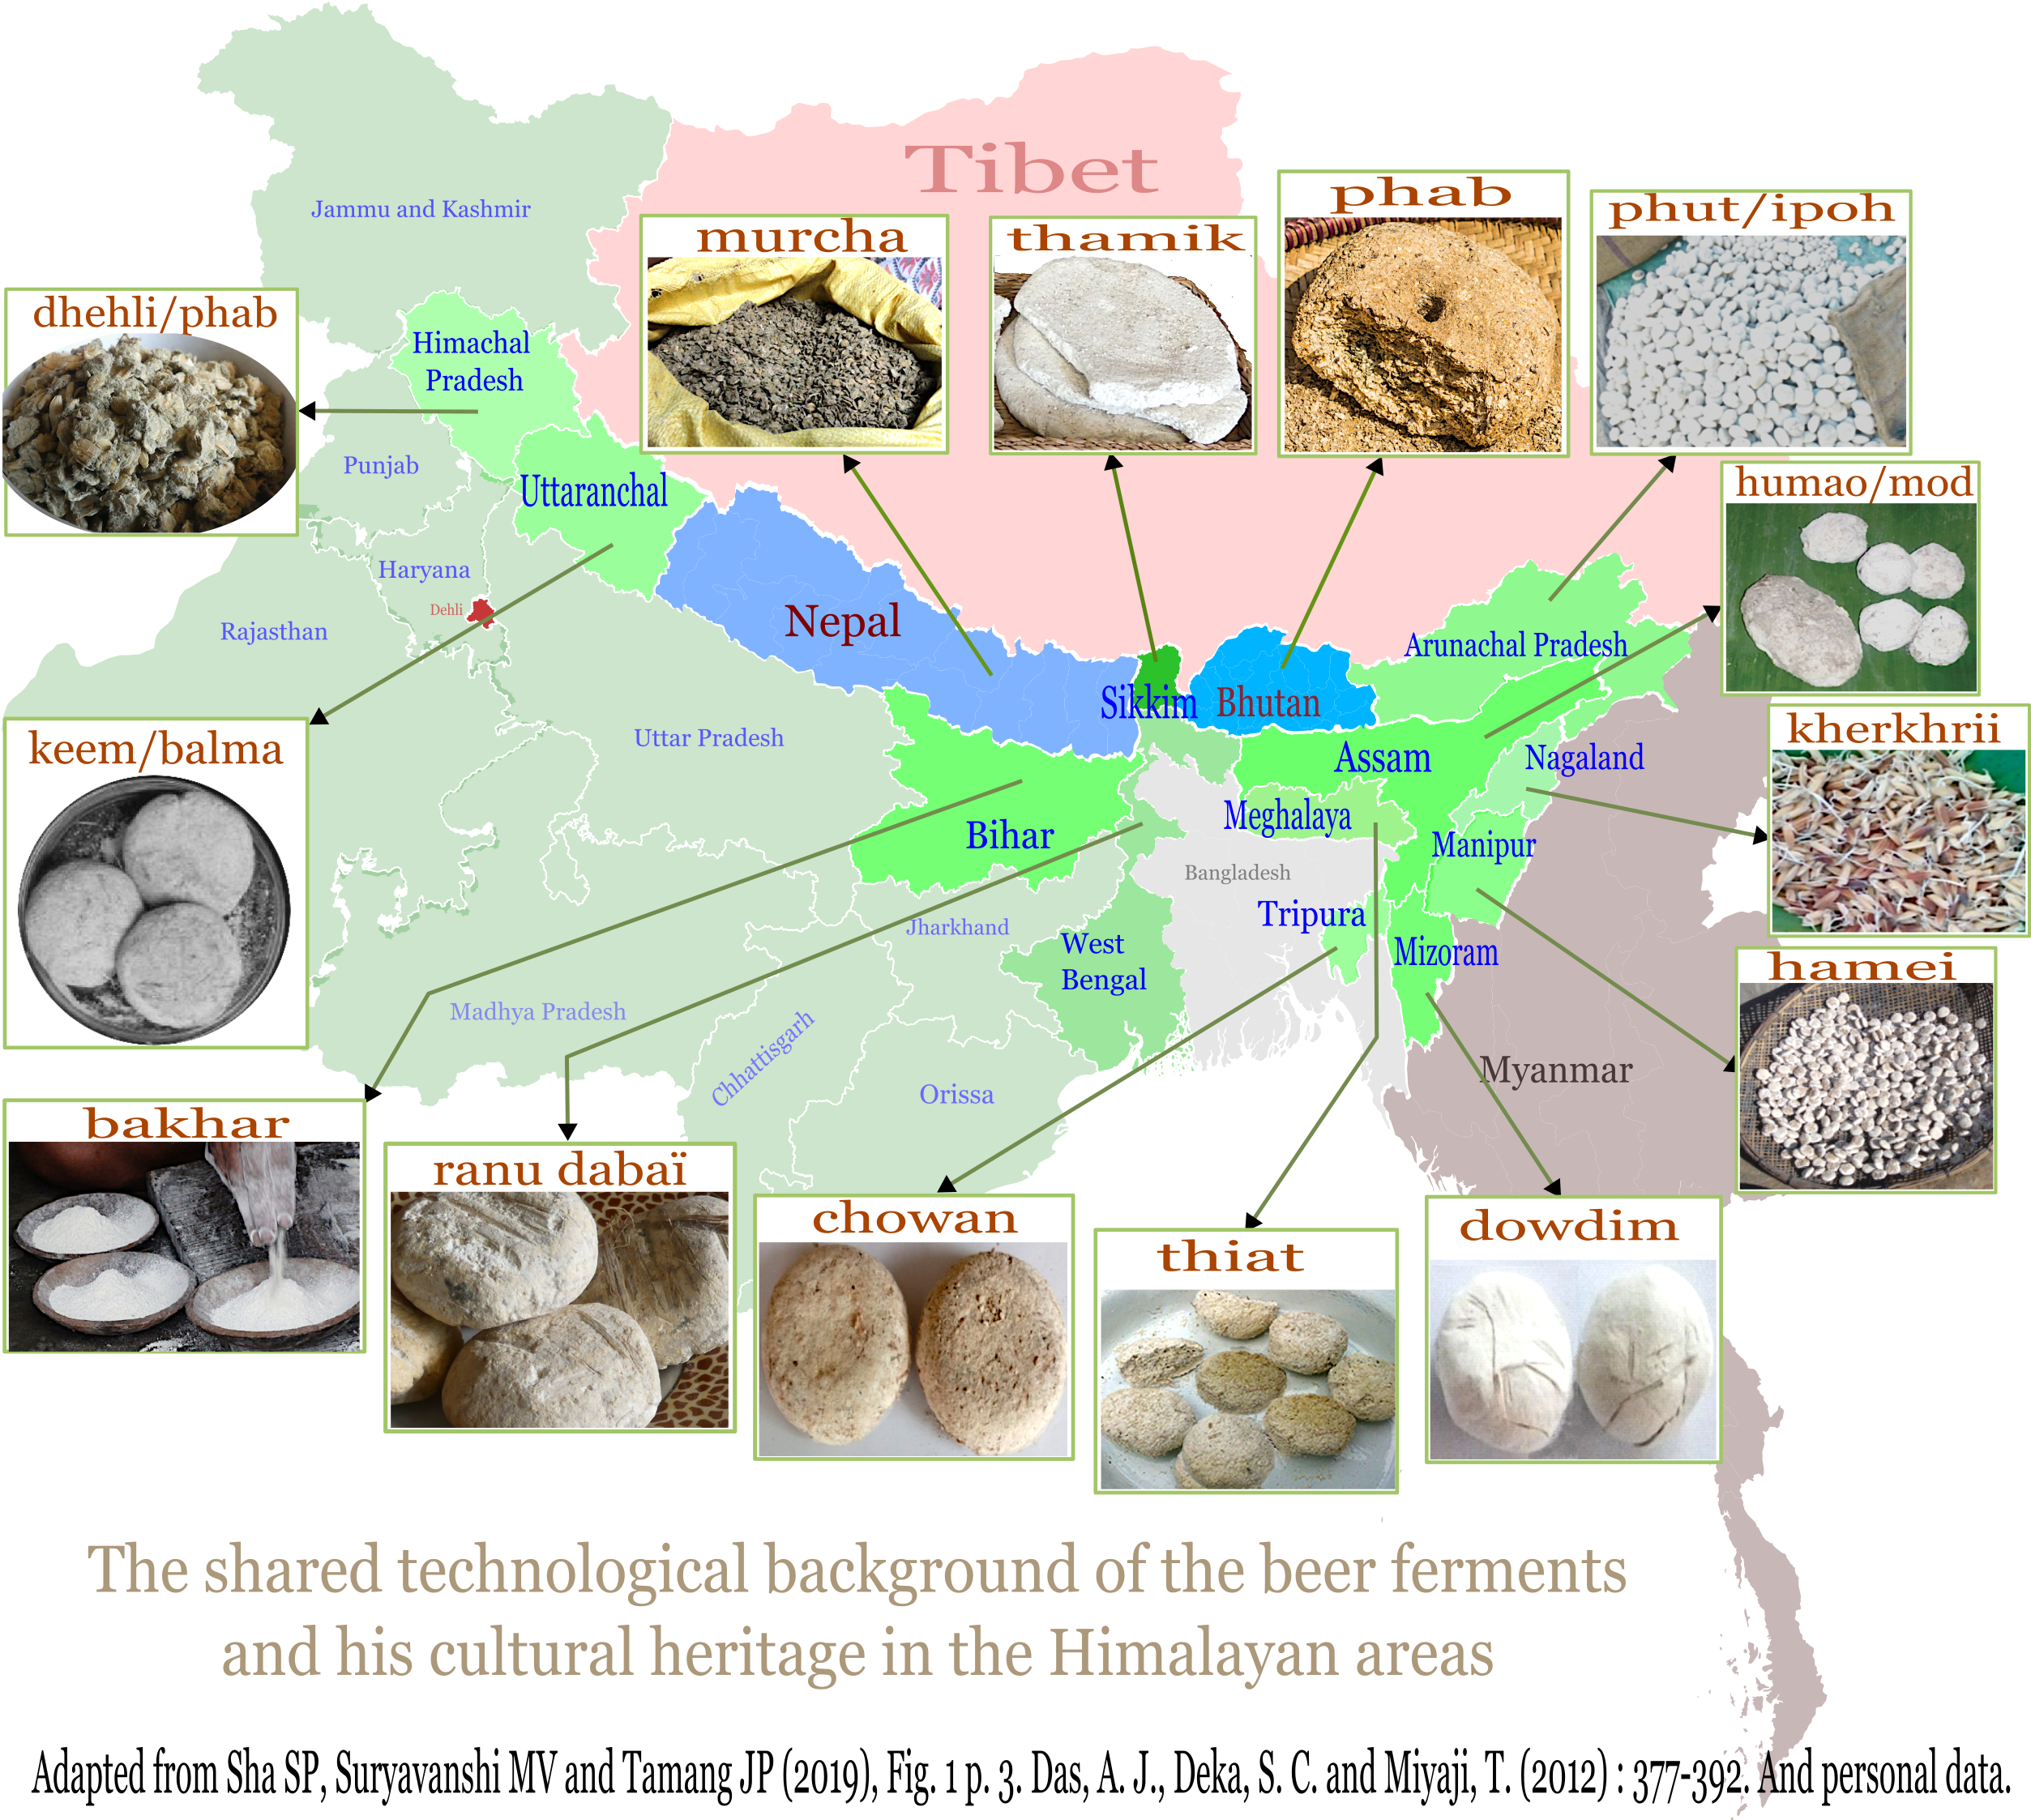 Map of the traditional beer ferments used today in the Himalayan regions